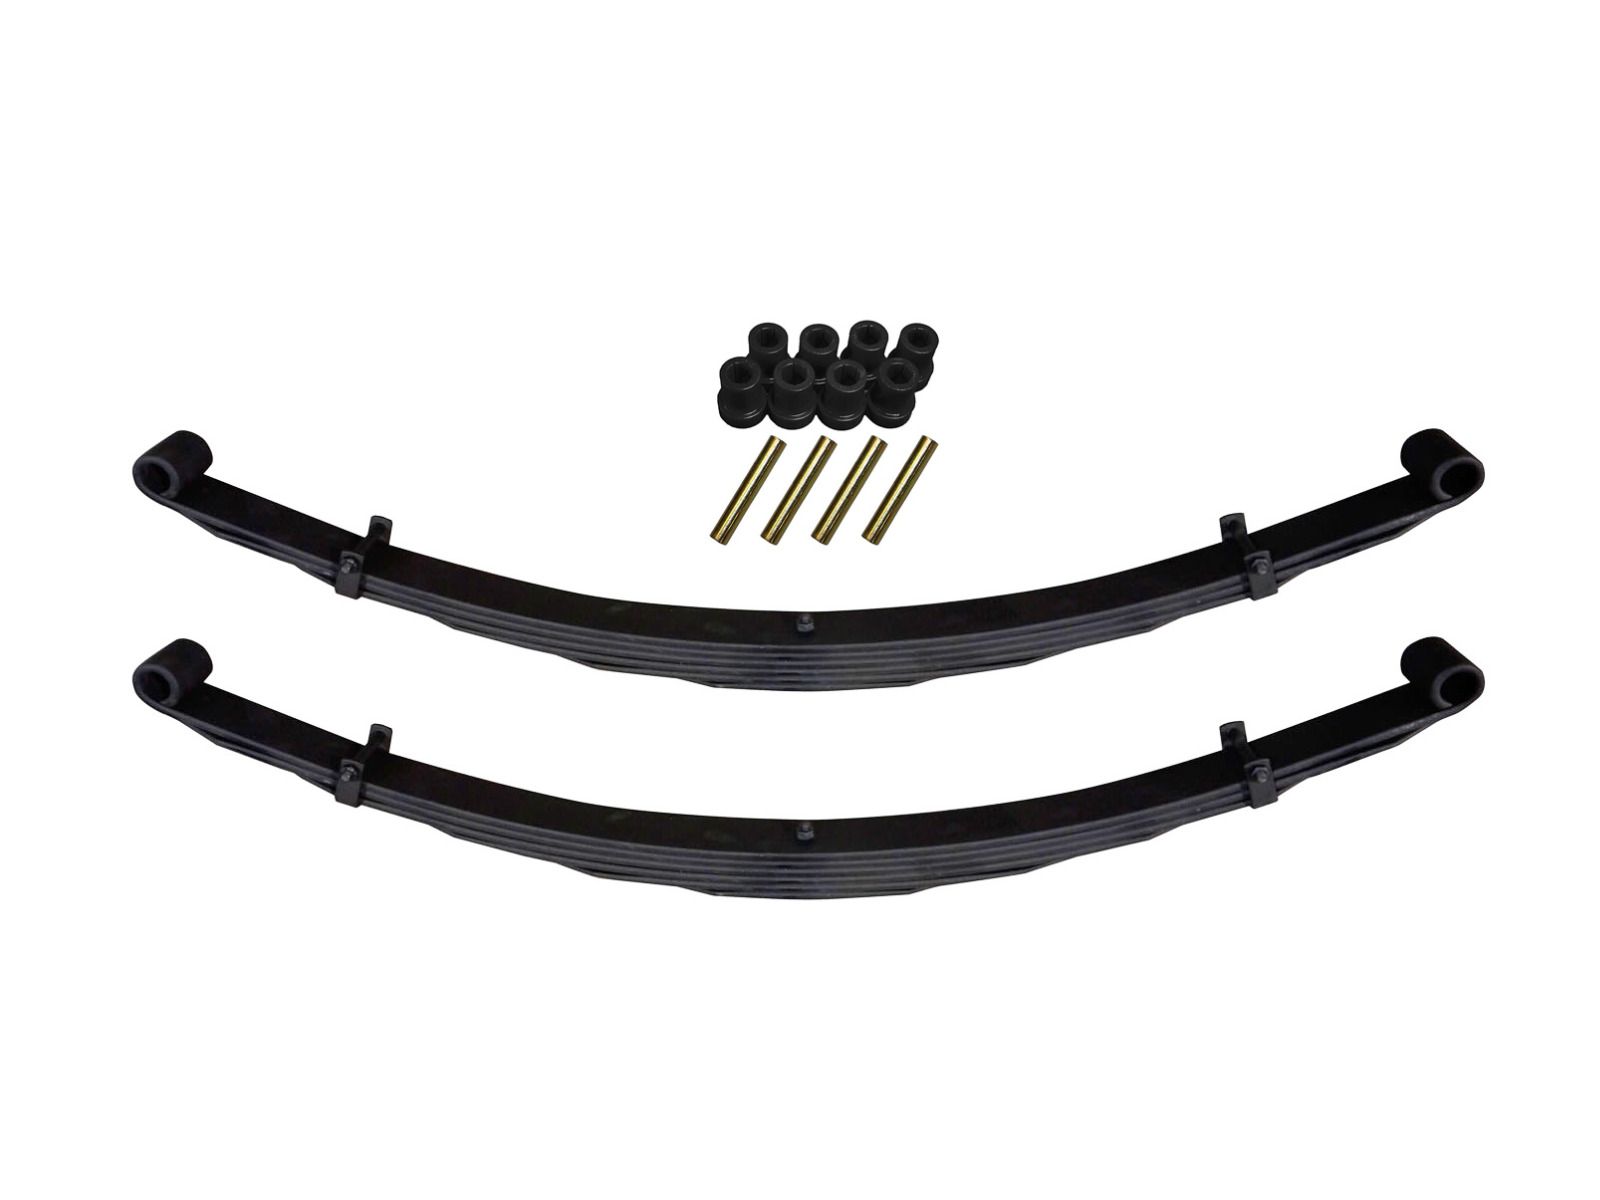 F250 1967-1977 Ford 4wd (High Boy) - Front 2" Lift Leaf Spring Kit (with bushings) by Skyjacker